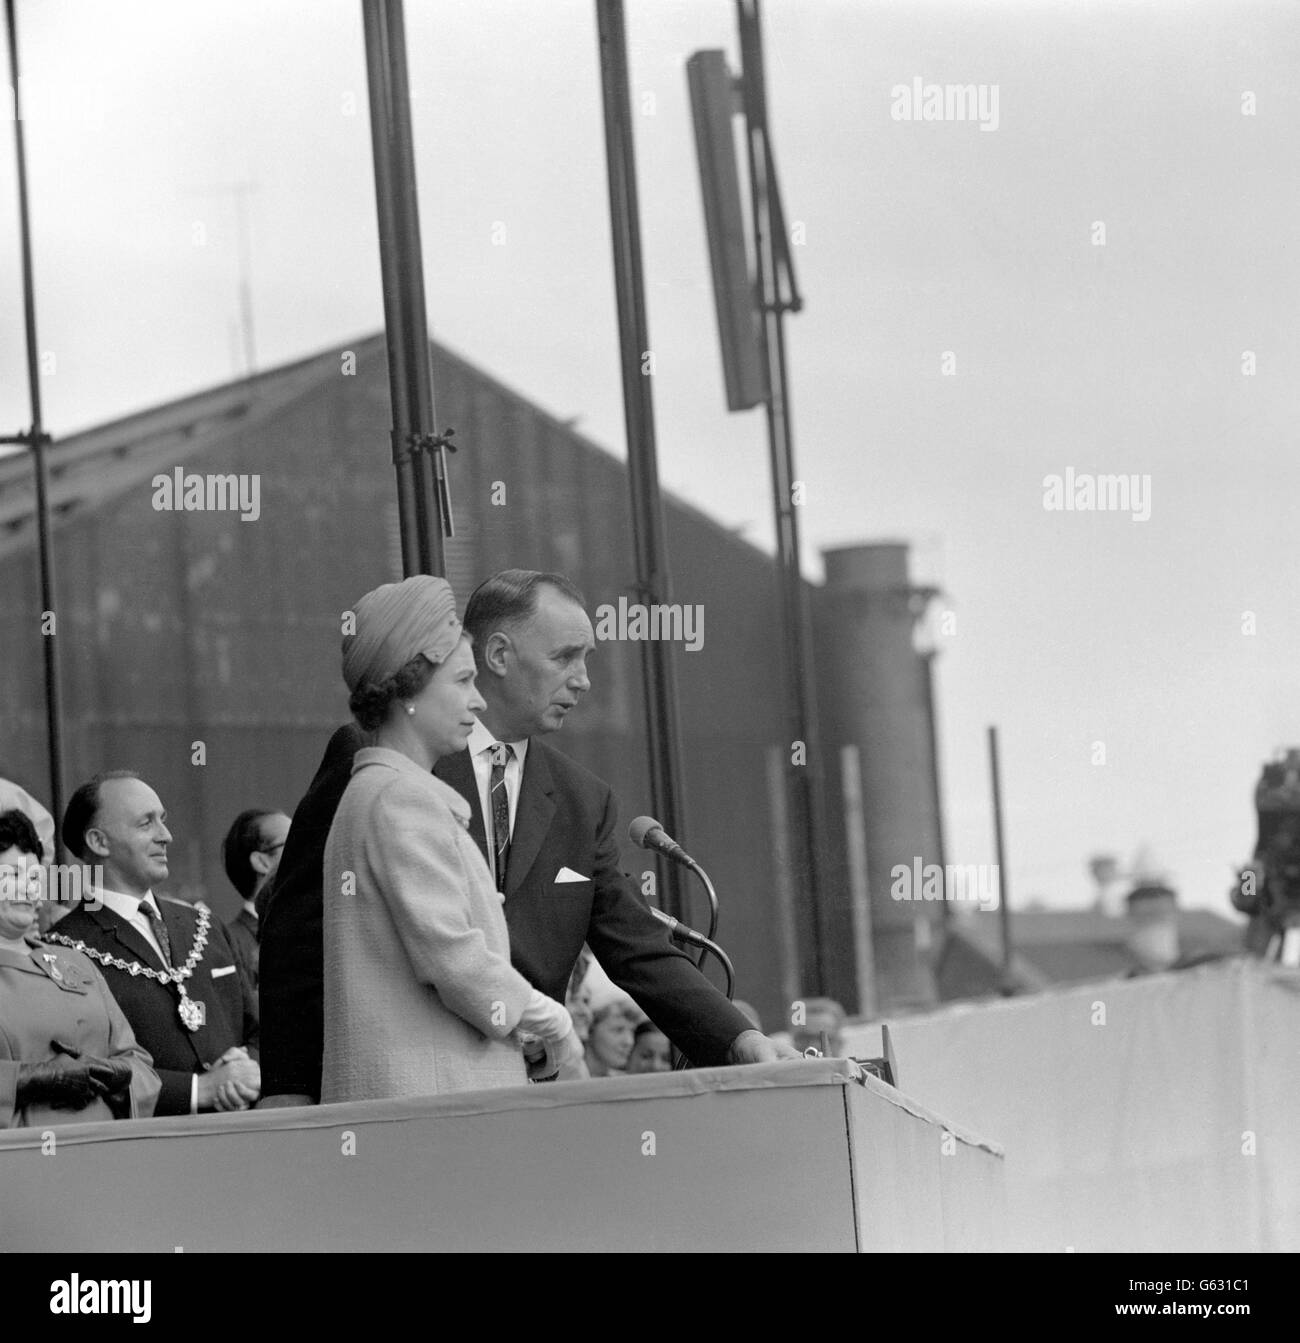 Wearing a wool coat of deep turquoise and a matching suede hat, The Queen presses the button to launch the new Cunard liner after revealing the names as Queen Elizabeth II at John Brown's Yard, Clydebank, Scotland. The name of the 58,000-ton liner was kept secret until the launching. The 25,500,000 vessel is destined to give Britain a world lead with the most advanced passenger liner ever built. Stock Photo